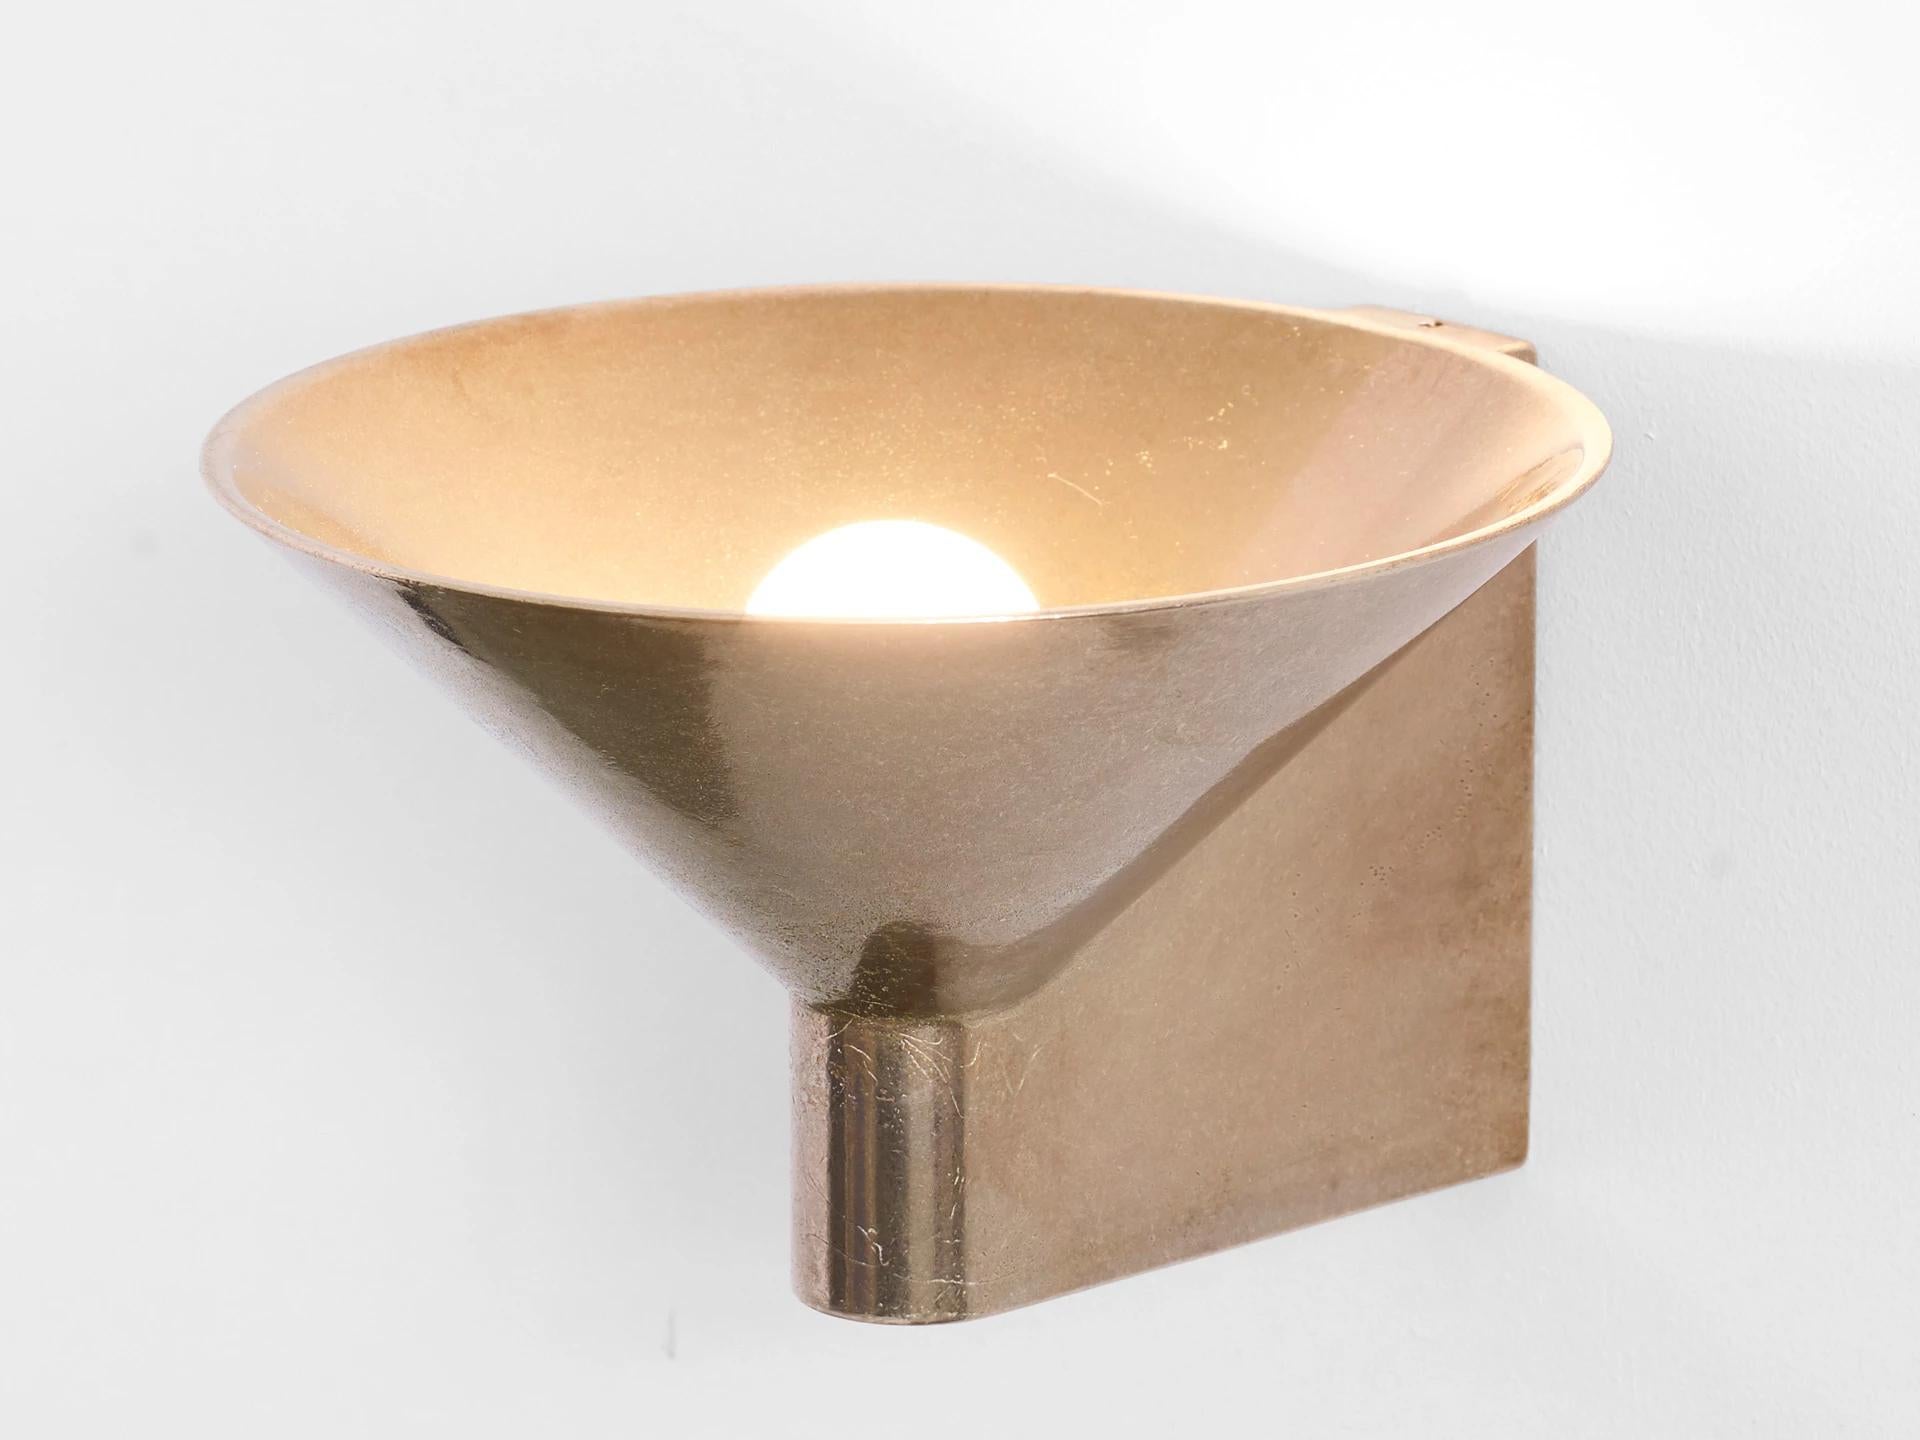 Conical Bronze Wall Light by Henry Wilson
Dimensions: W 19 x D 20 x H 12 cm
Materials: Bronze

Lost wax cast in solid bronze, the conical up light is our most complex production casting to date. Each piece is hand finished and can be mounted to any